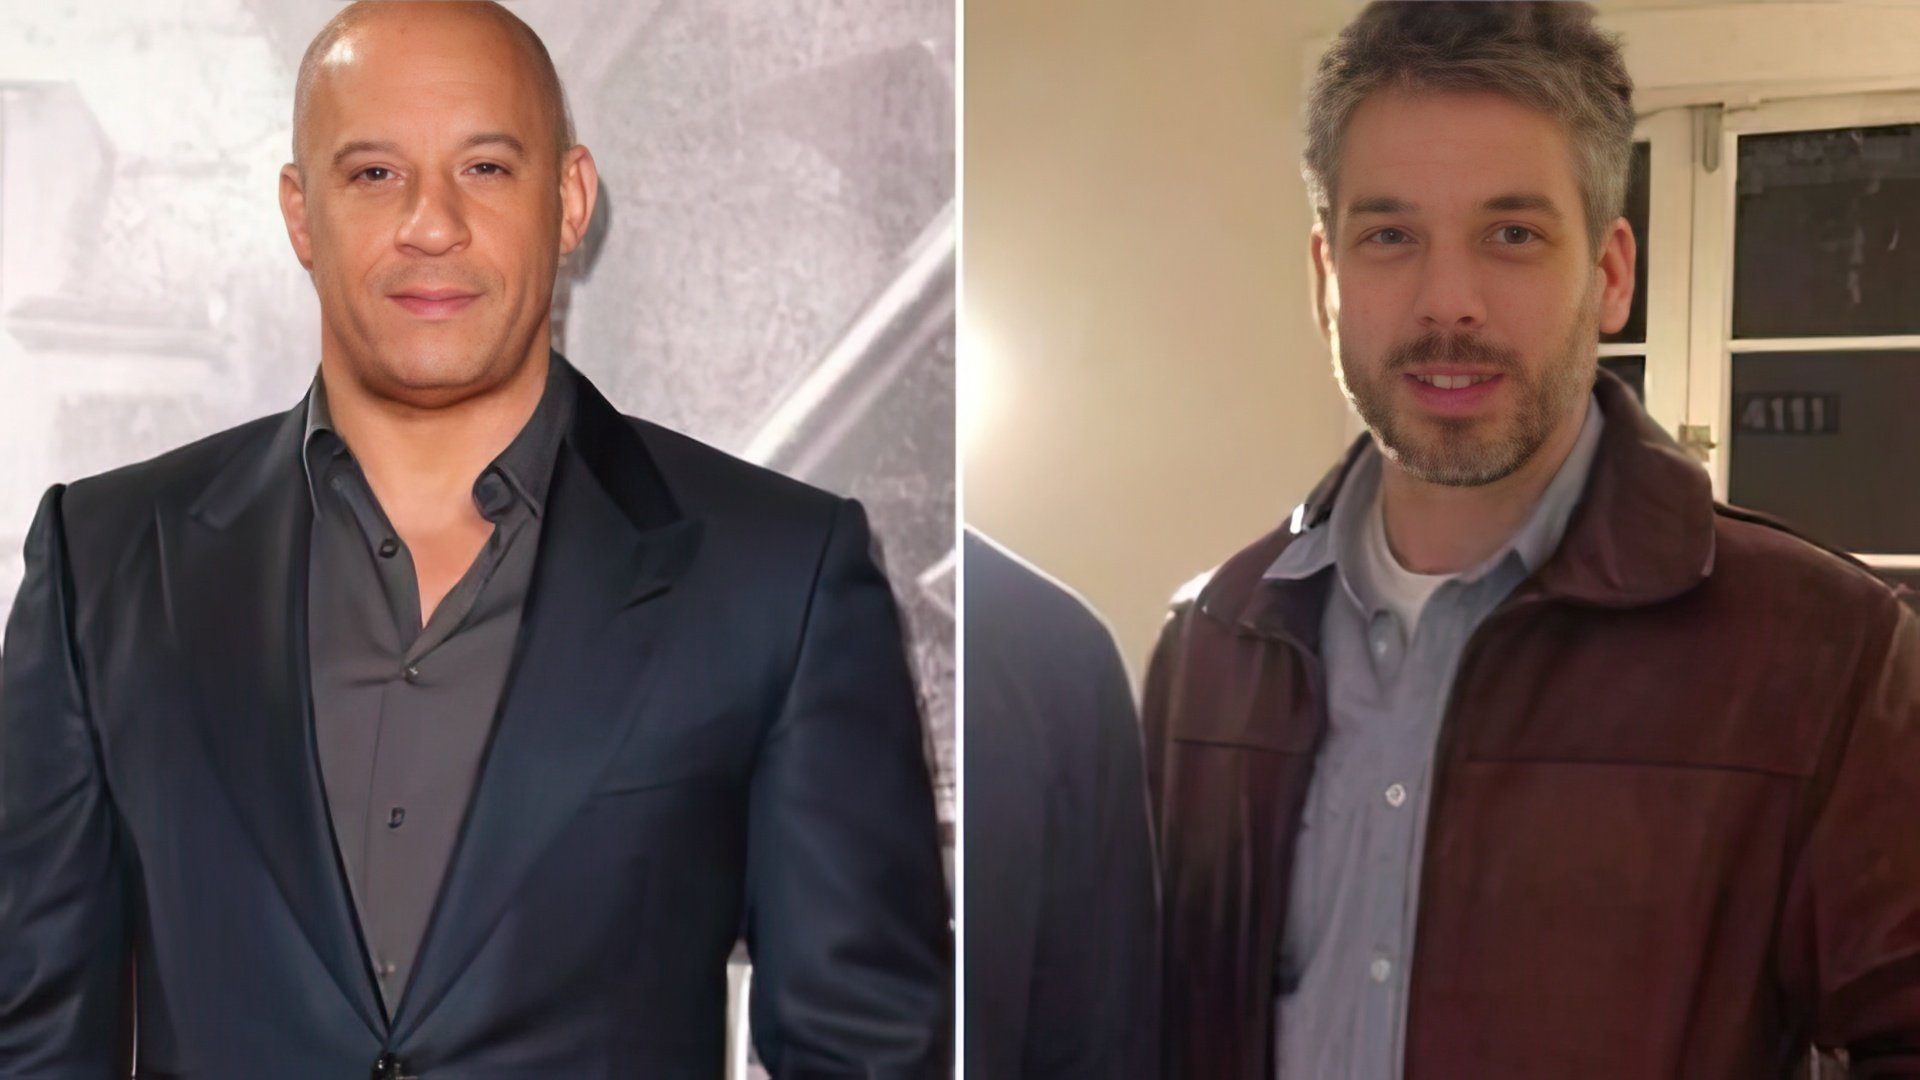 Vin Diesel has a twin brother, Paul